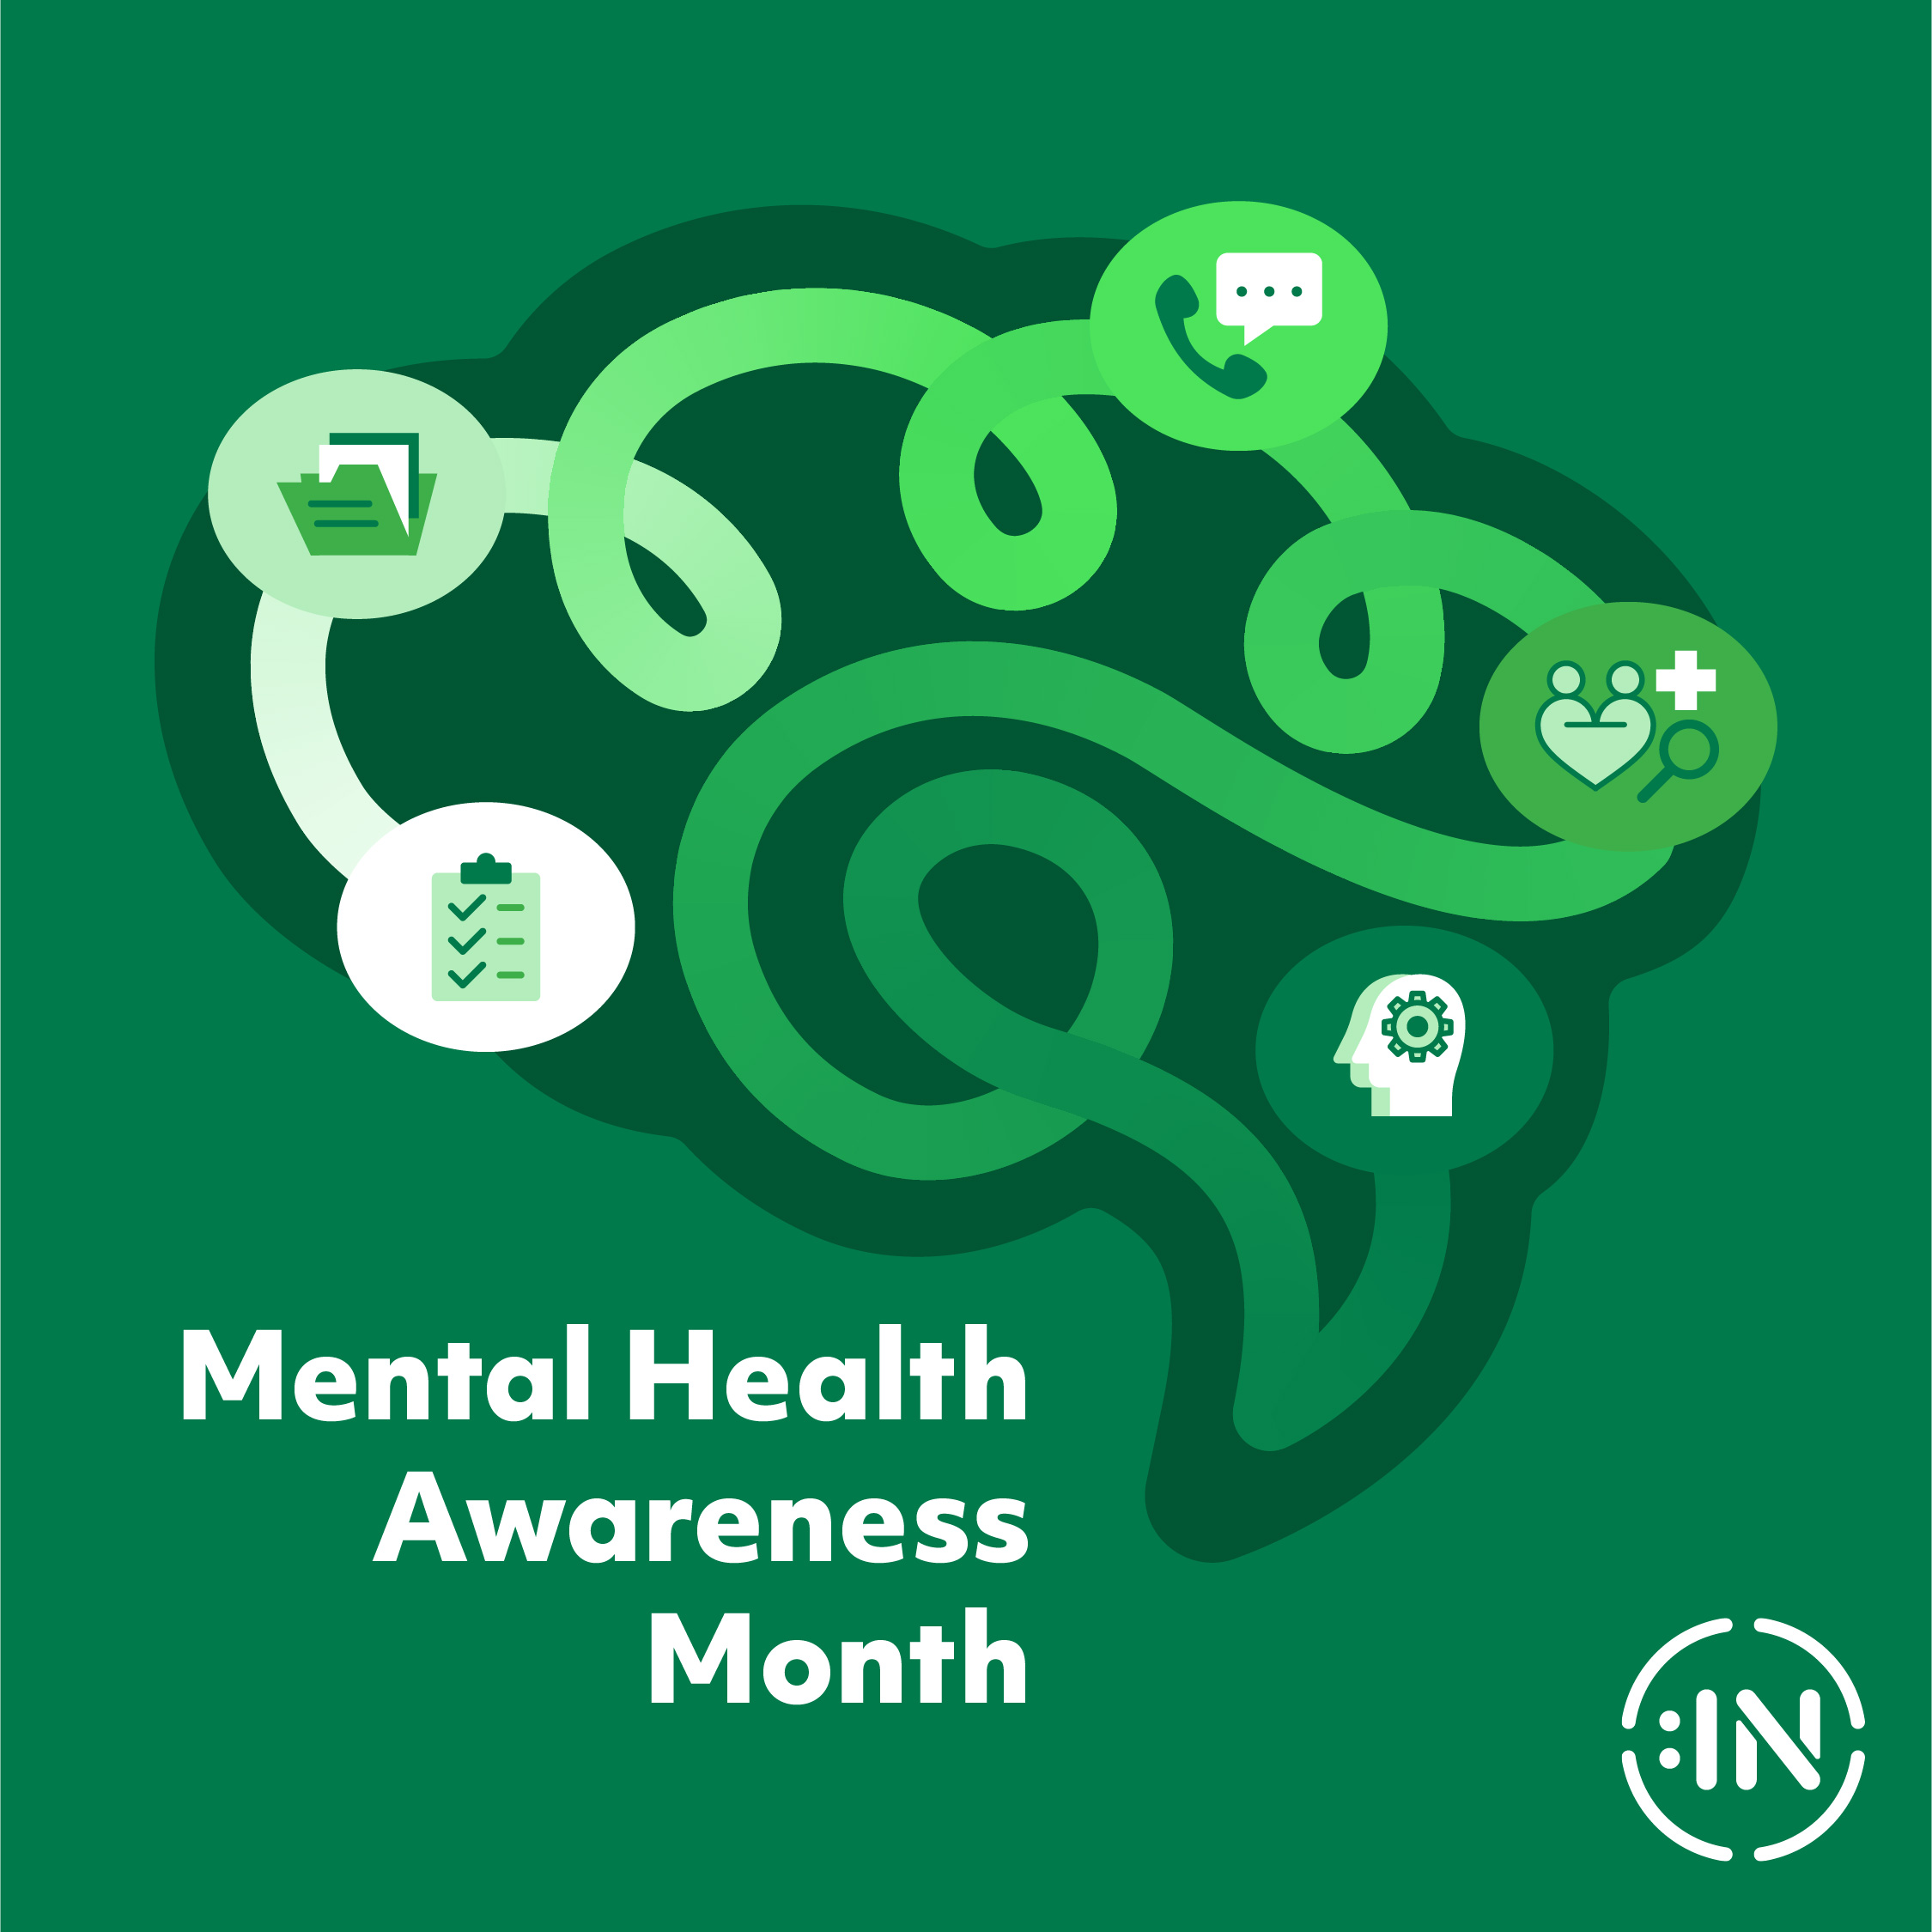 A green background with white text reading Mental Health Awareness Month. To the right is a silhouetted illustration of a brain with various connected icons related to mental wellness. 